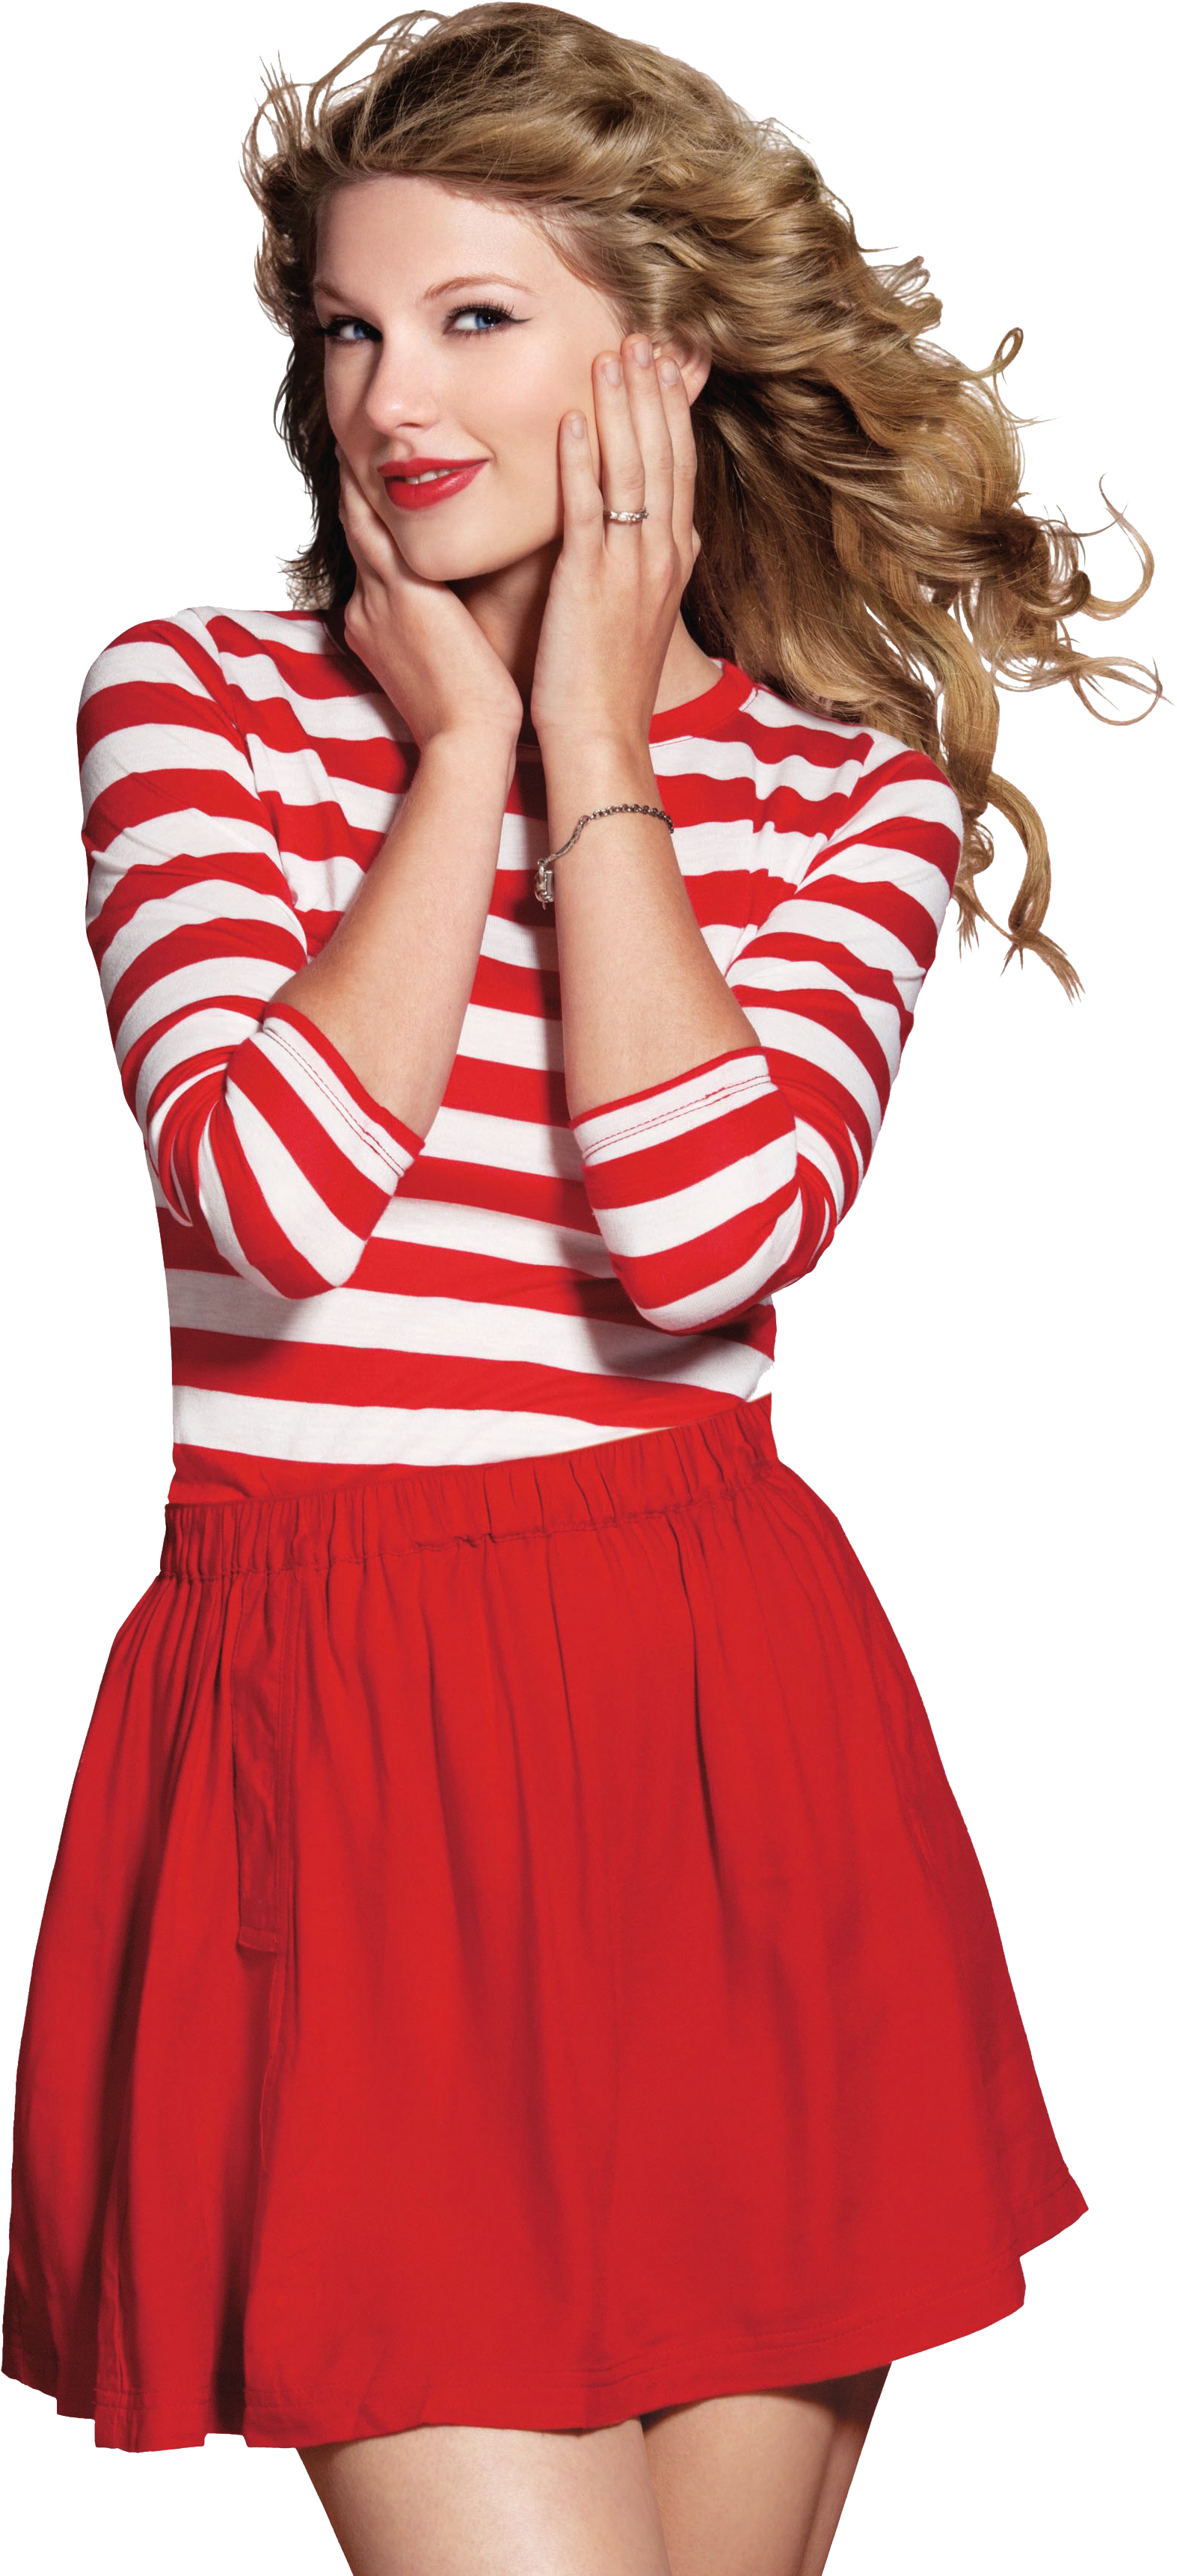 A Woman In A Red And White Striped Shirt